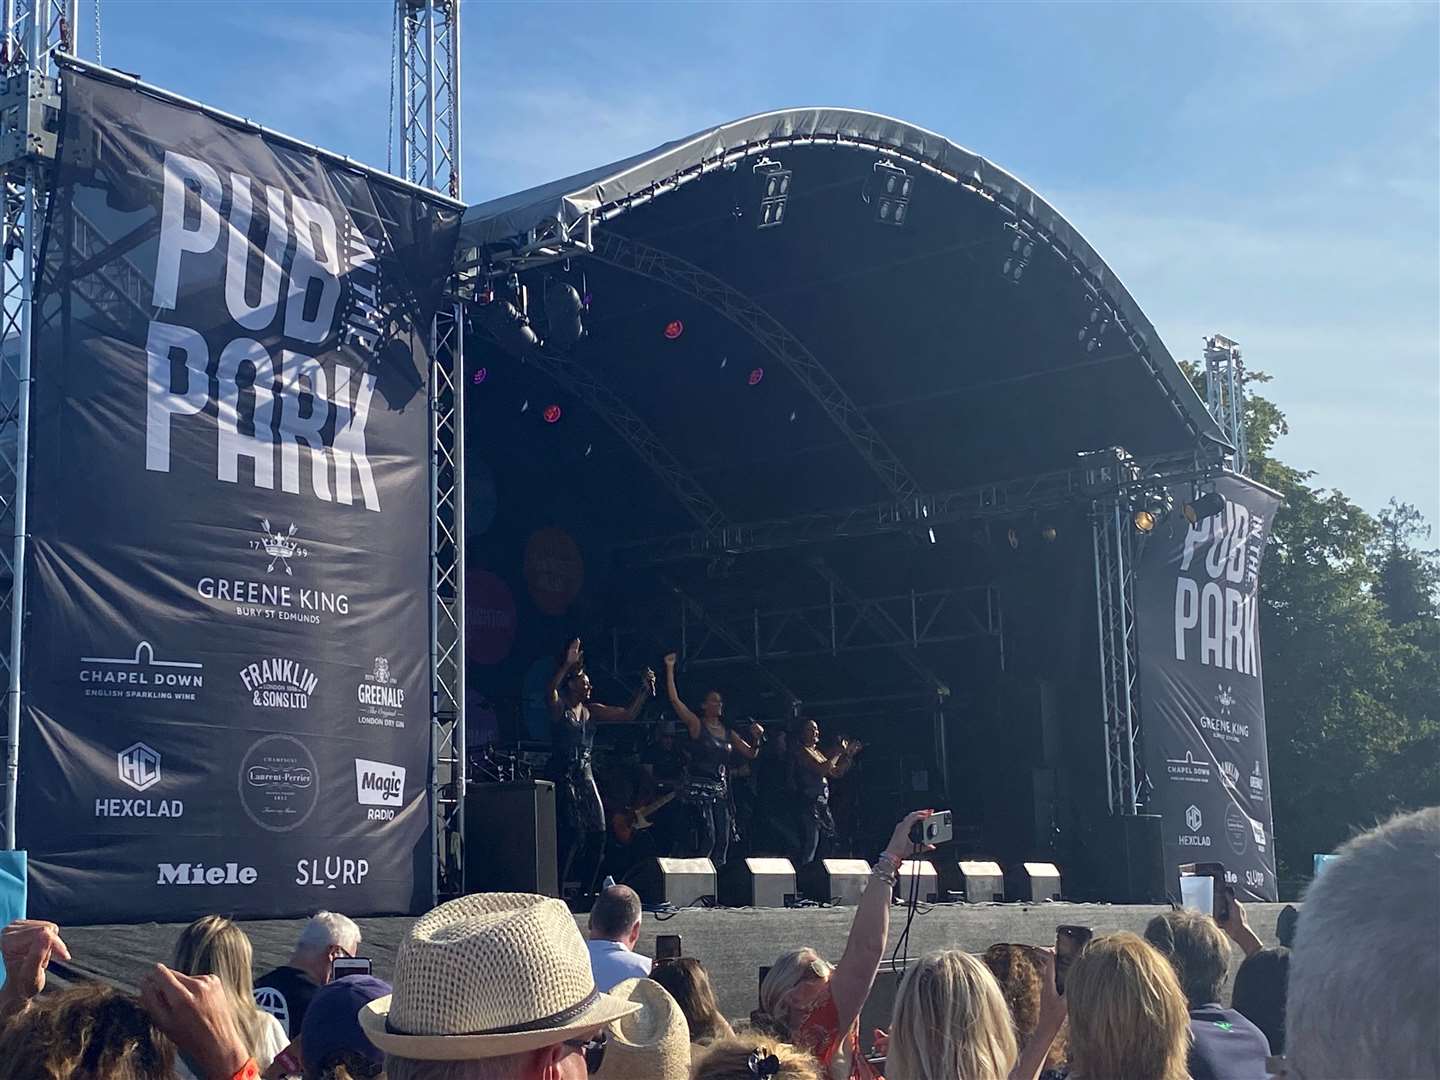 Sister Sledge were one of the headline acts at Pub in the Park last year